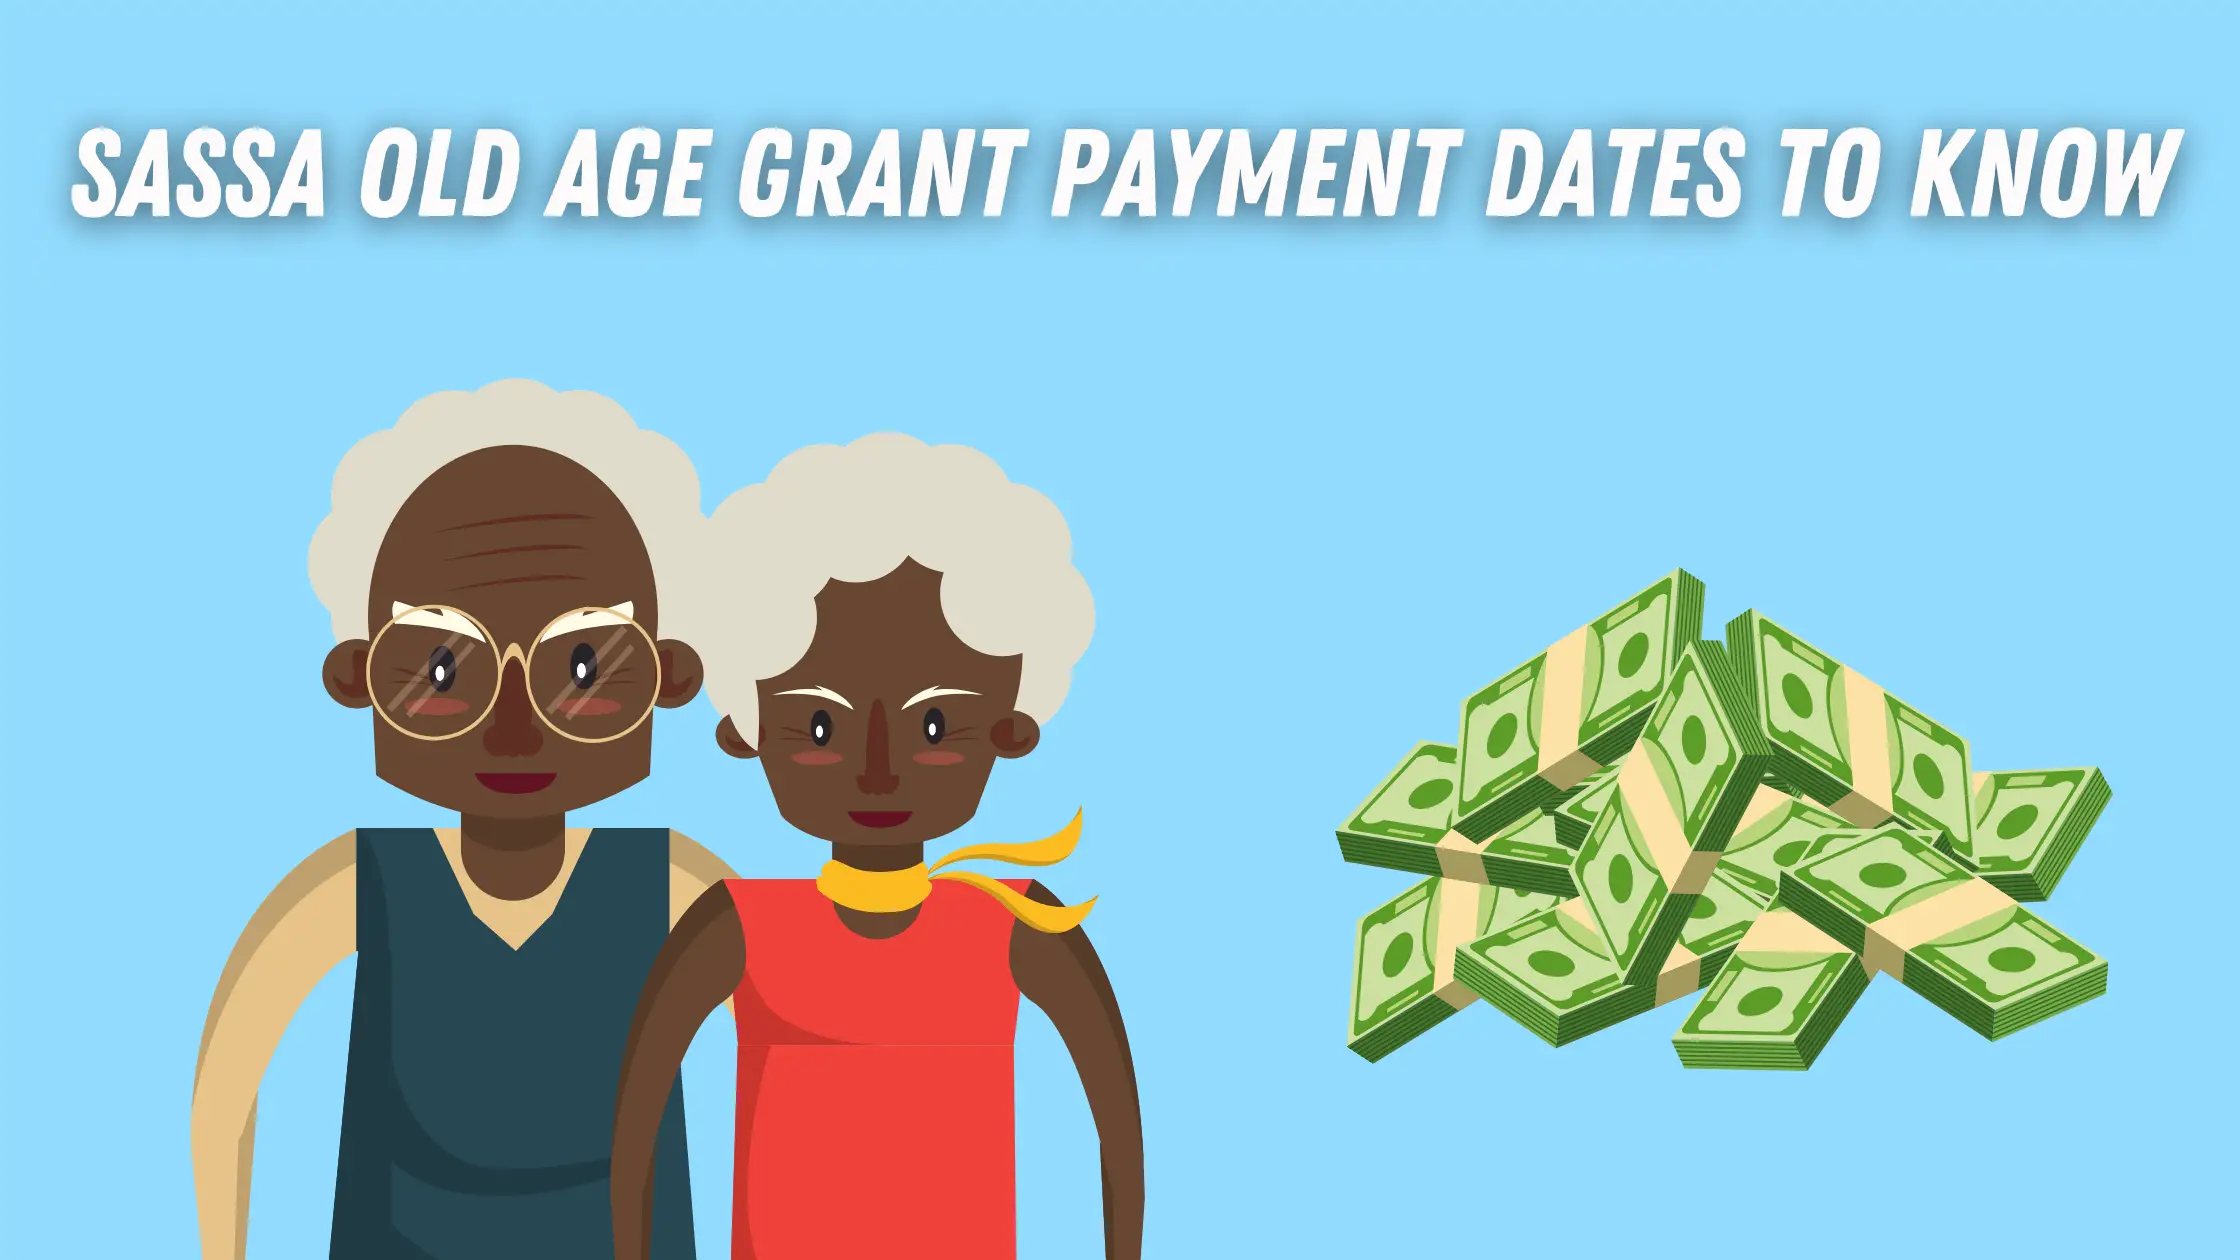 SASSA Old Age Grant Payment Dates To Know